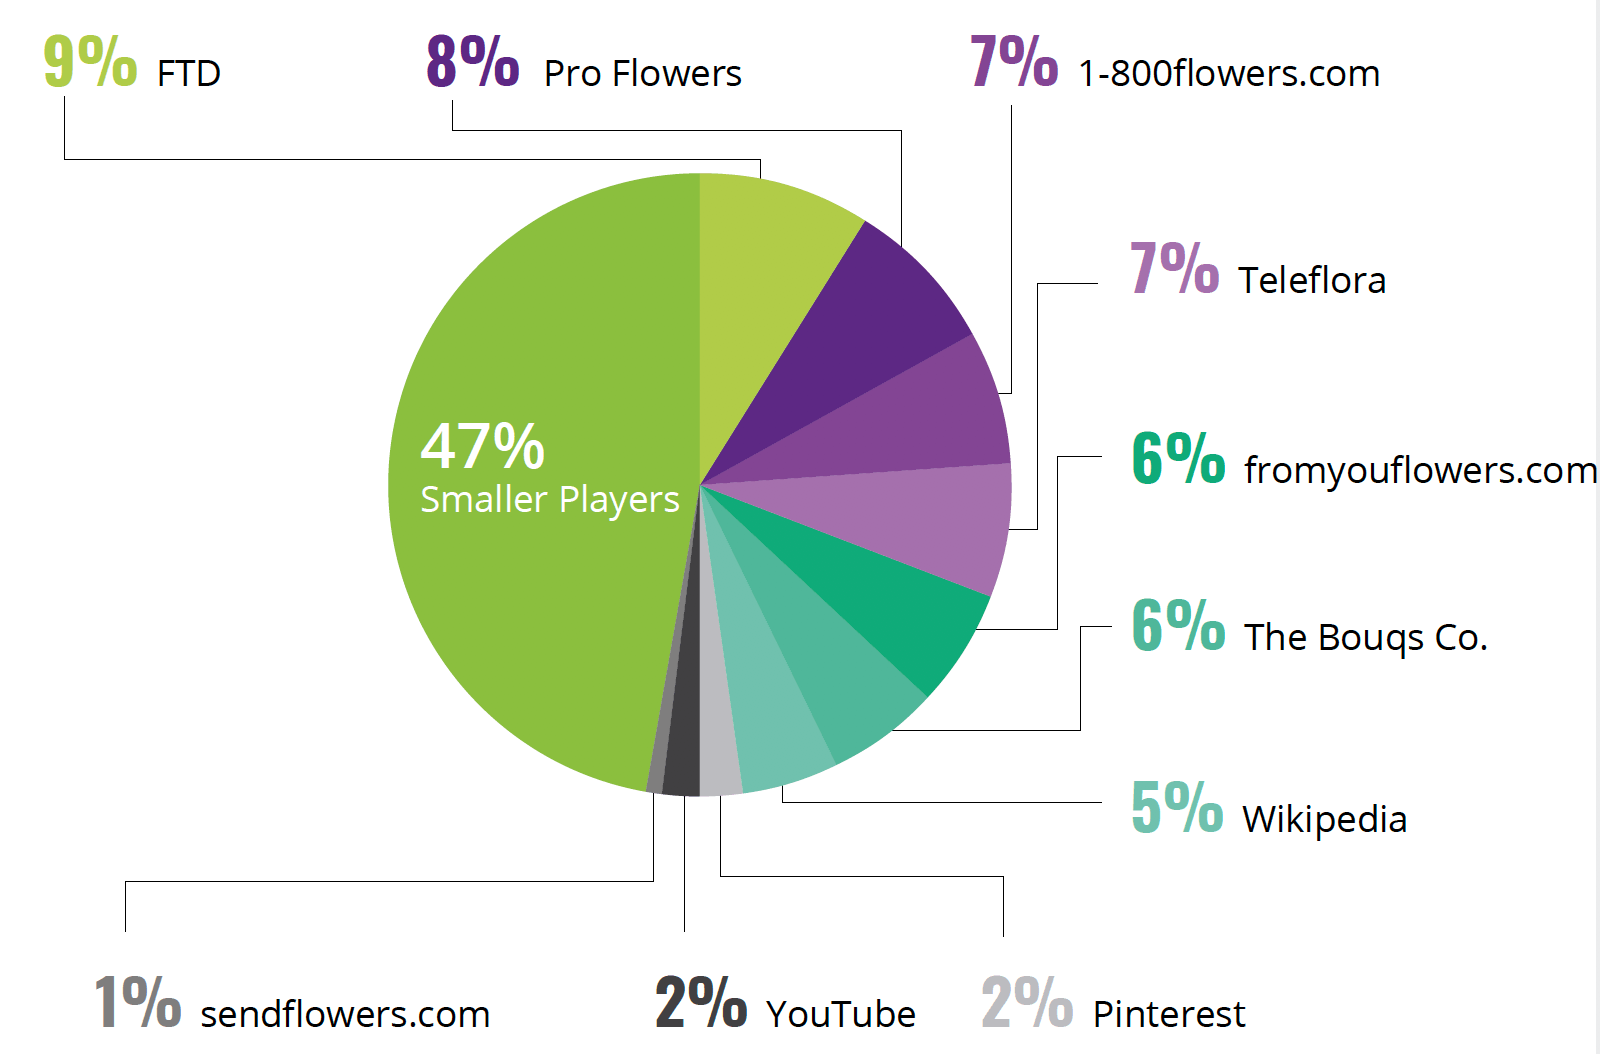 Breakdown of results on Google results page for flowers-related searches.